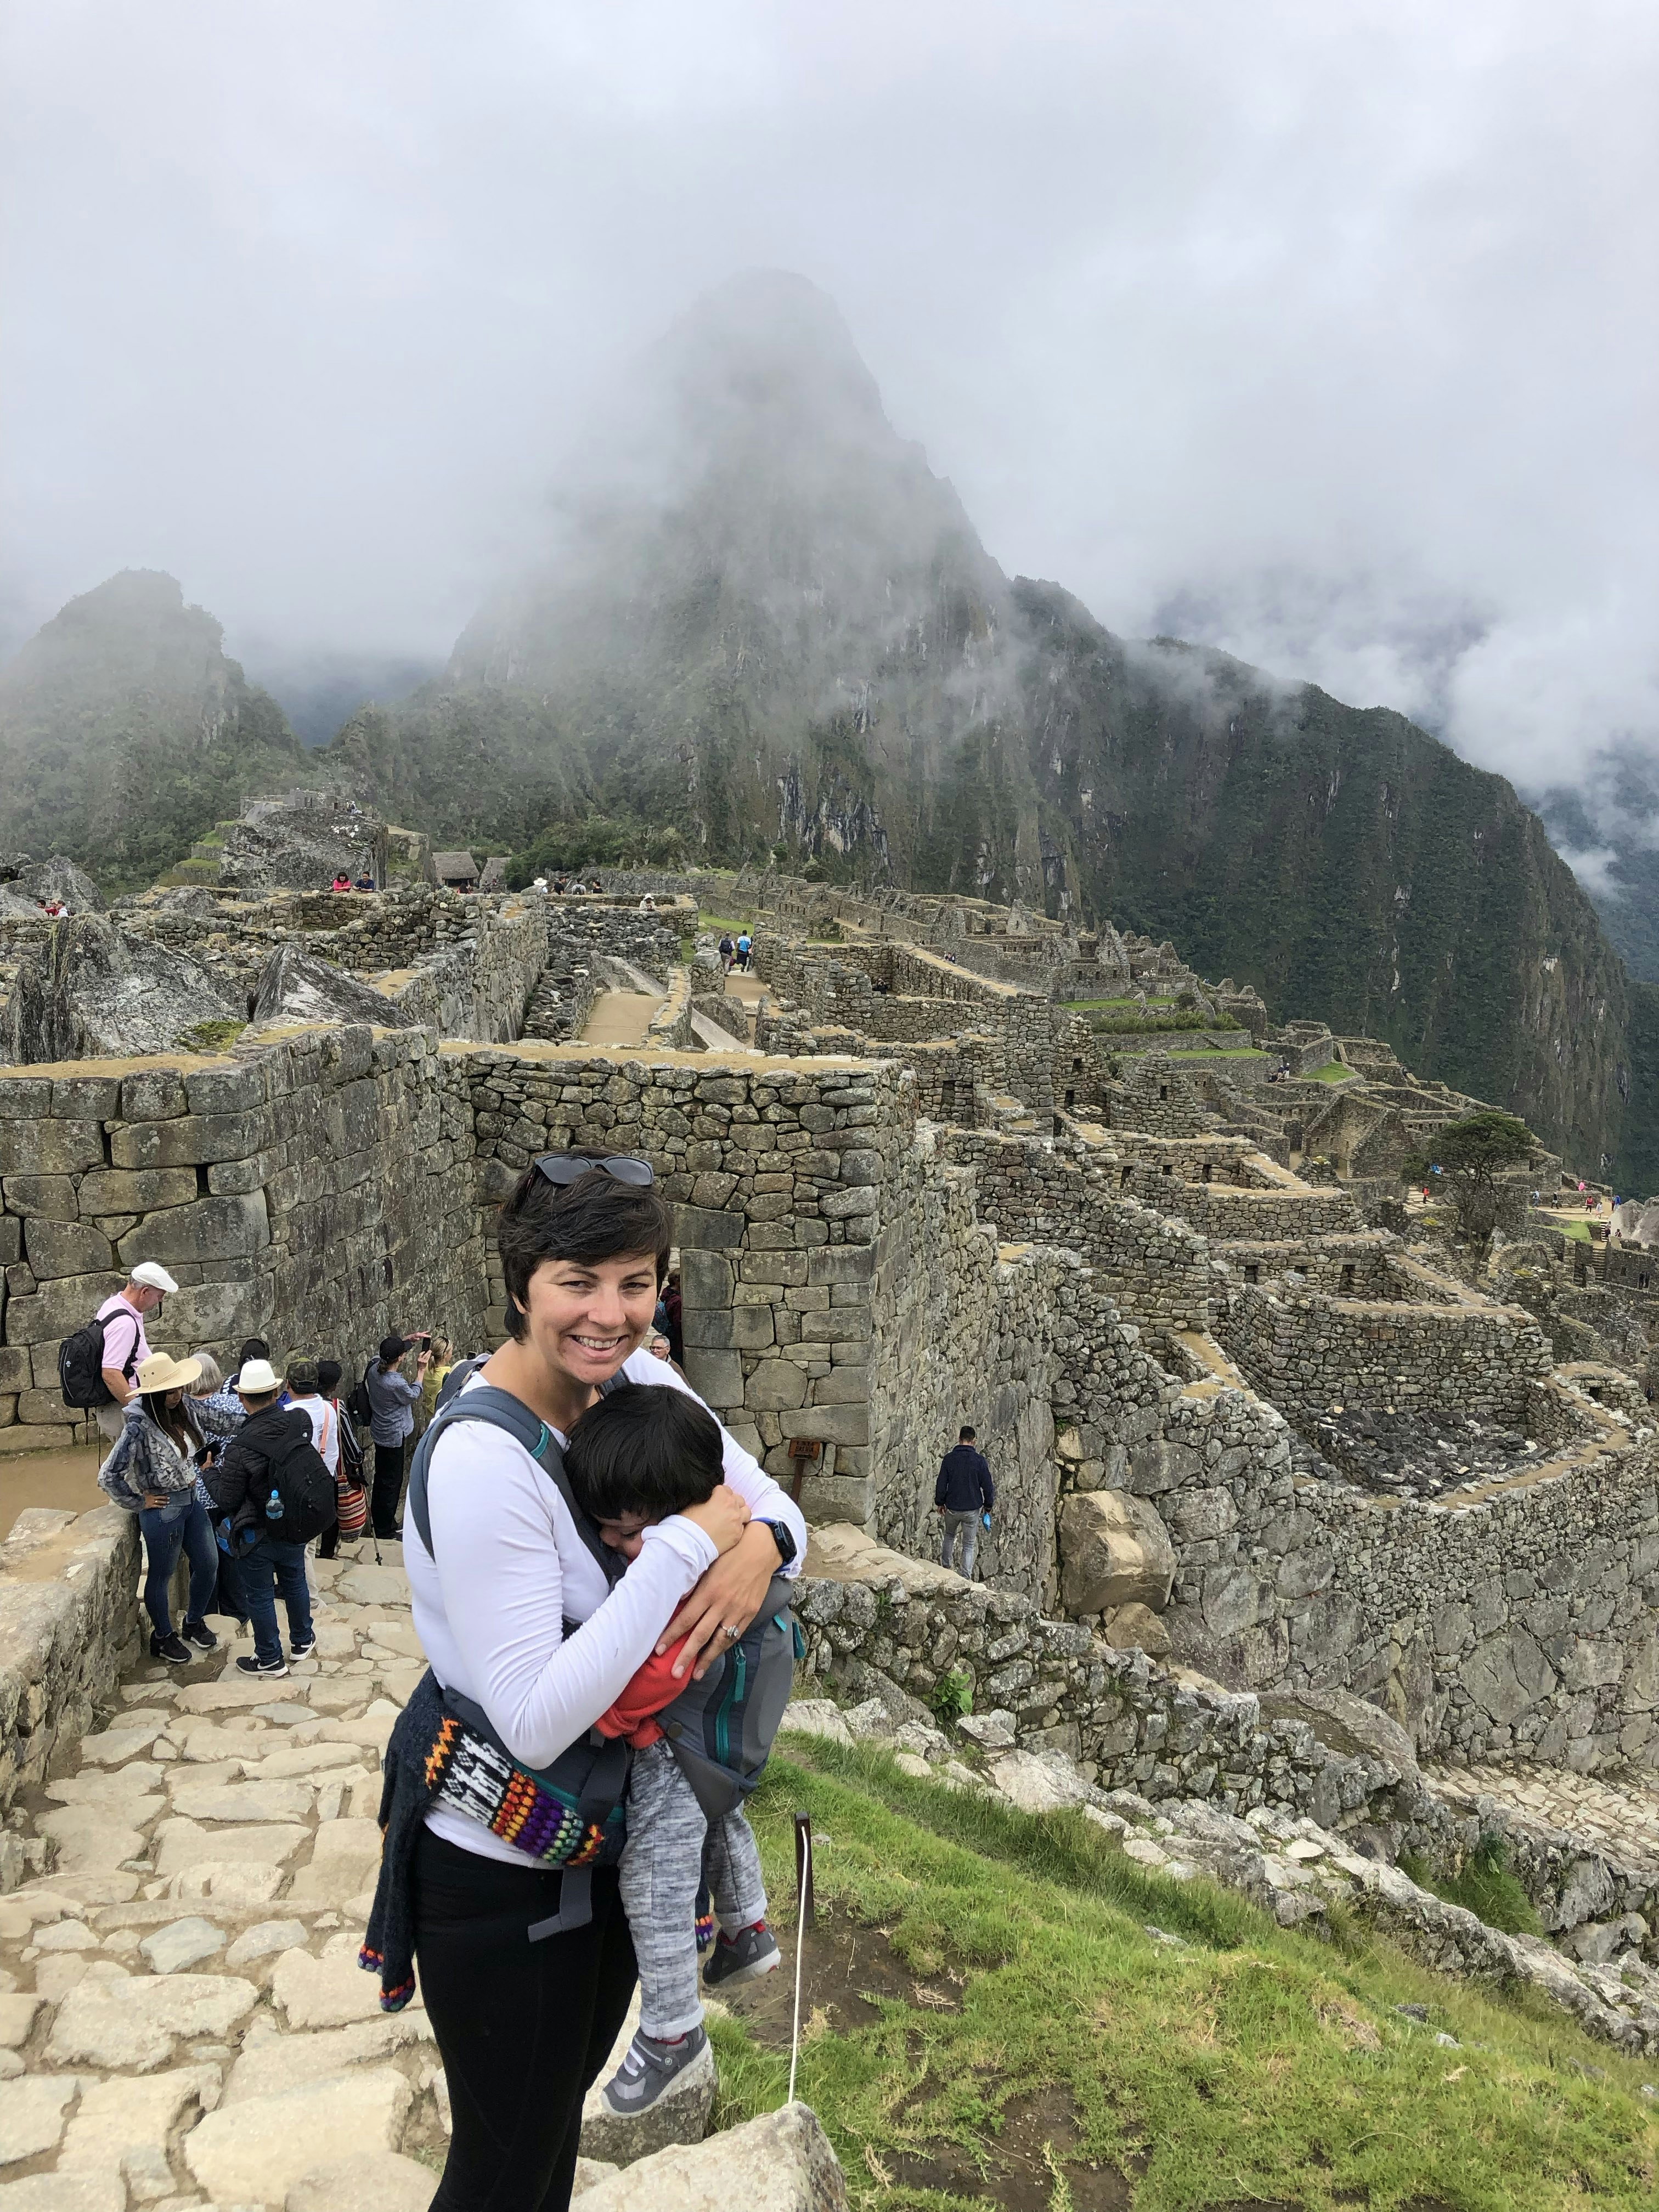 A woman holding a small baby poses in front of Incan ruins at Machu Picchu